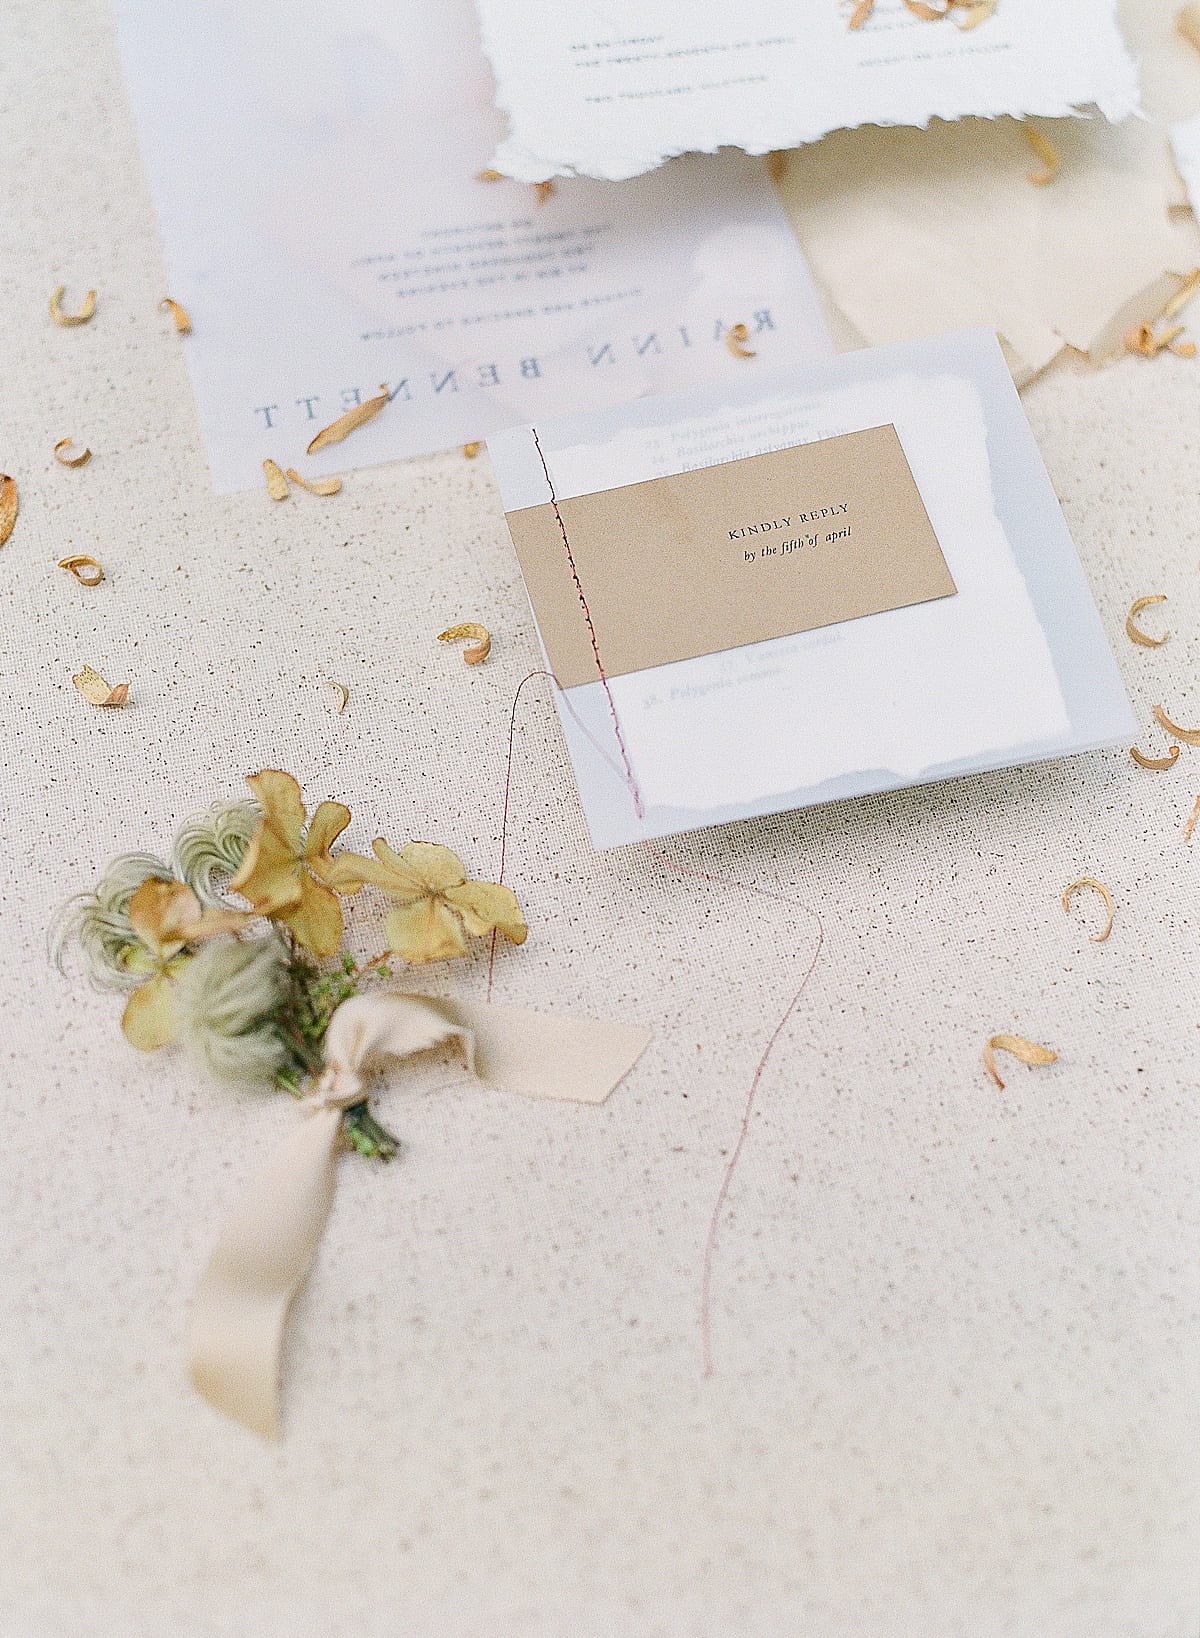 Wedding RSVP and boutonniere